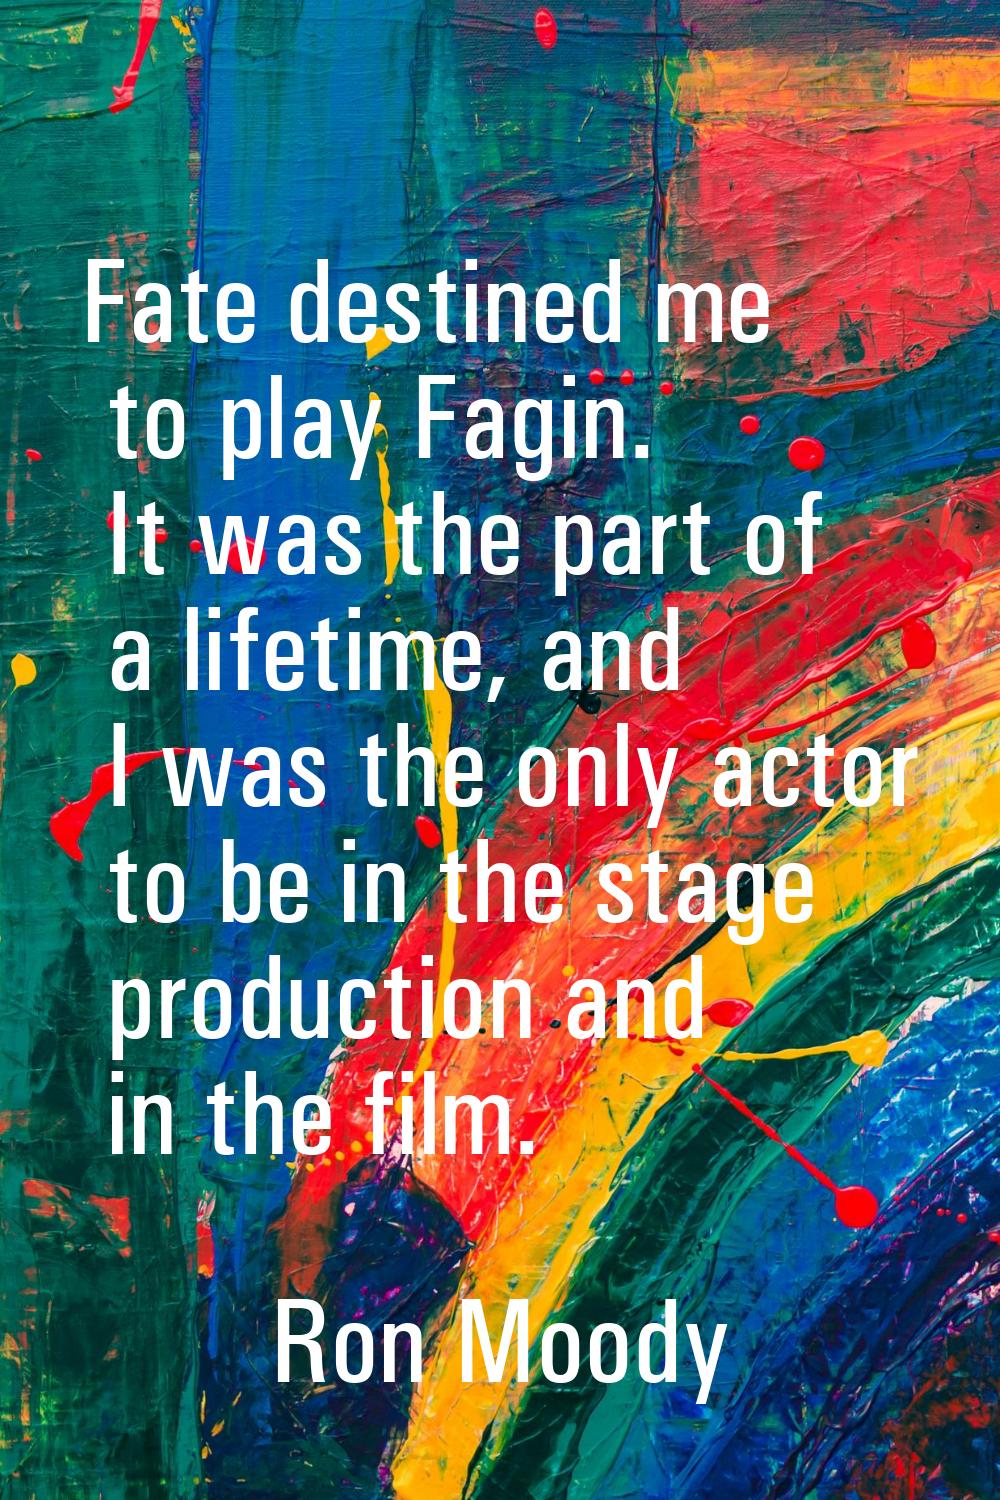 Fate destined me to play Fagin. It was the part of a lifetime, and I was the only actor to be in th